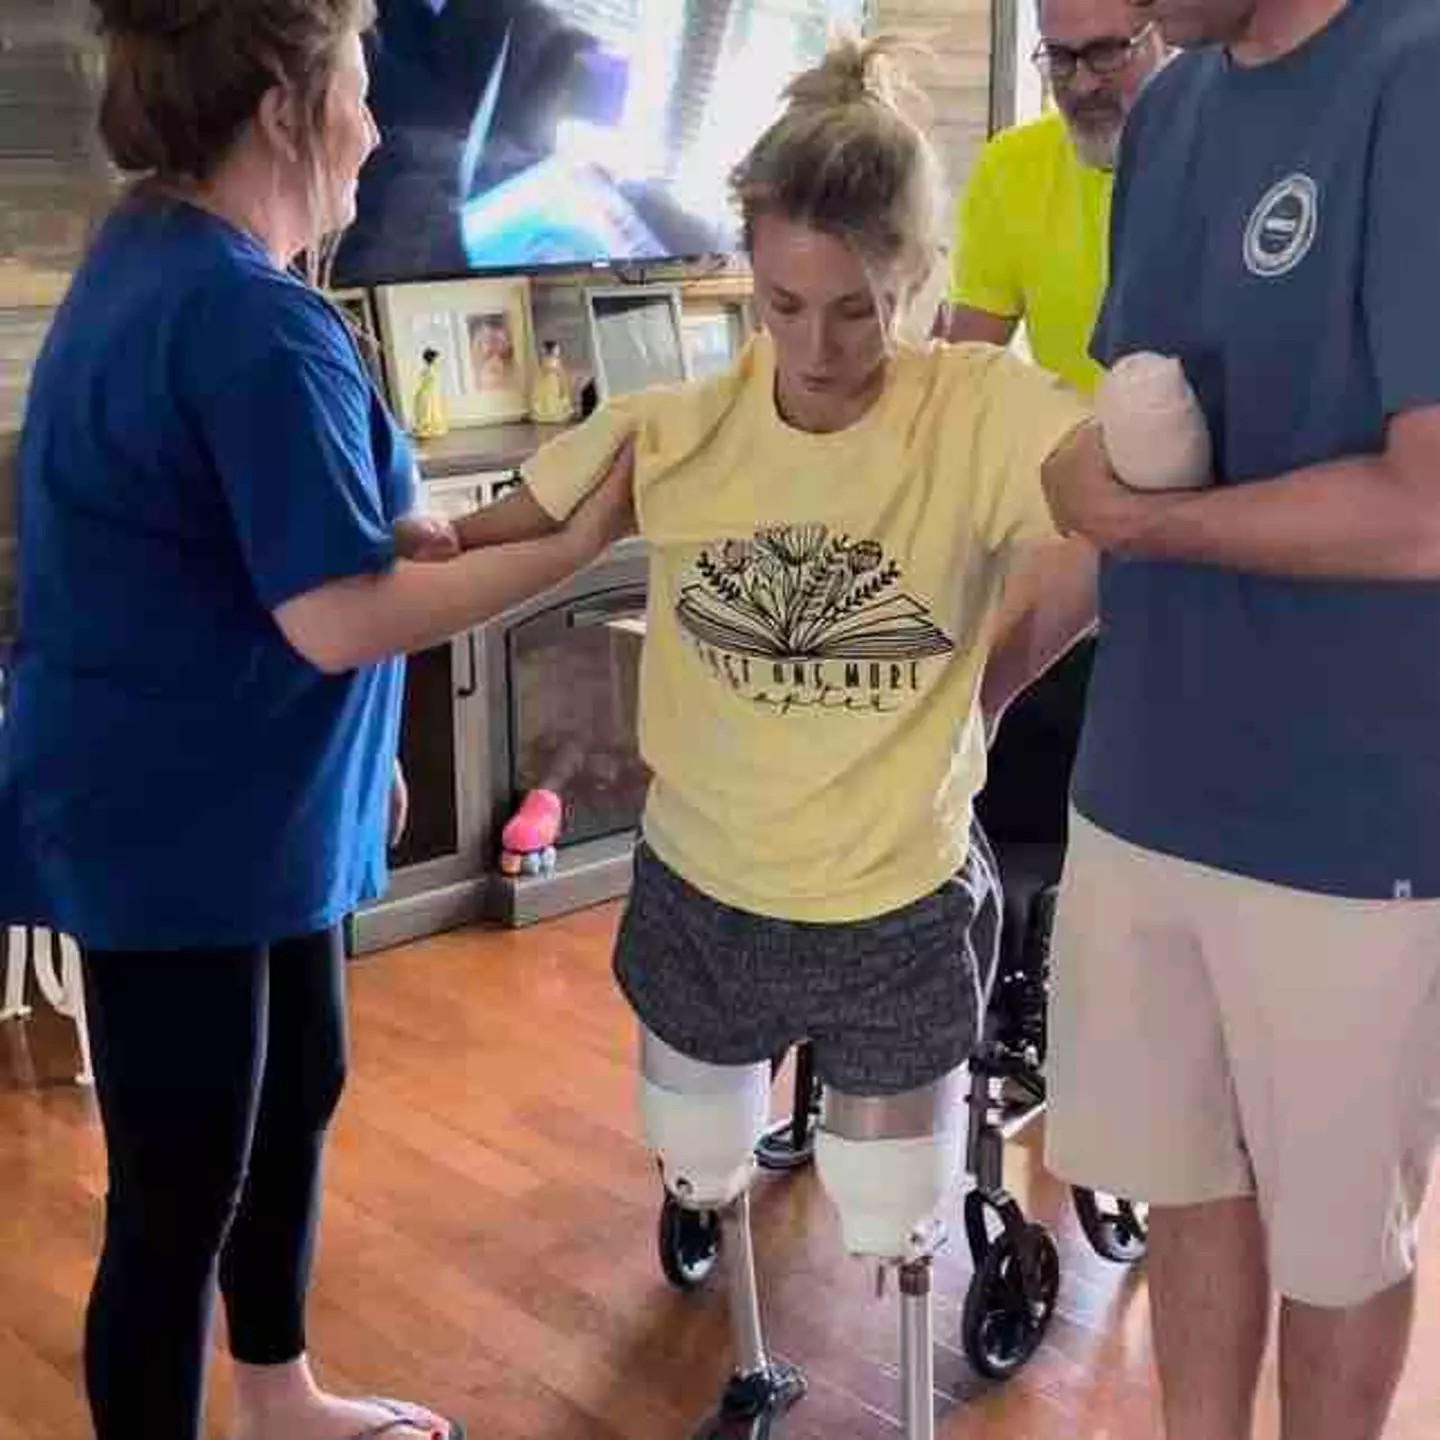 She's now re-learning to walk. (GoFundMe/ Miraclesformullins)